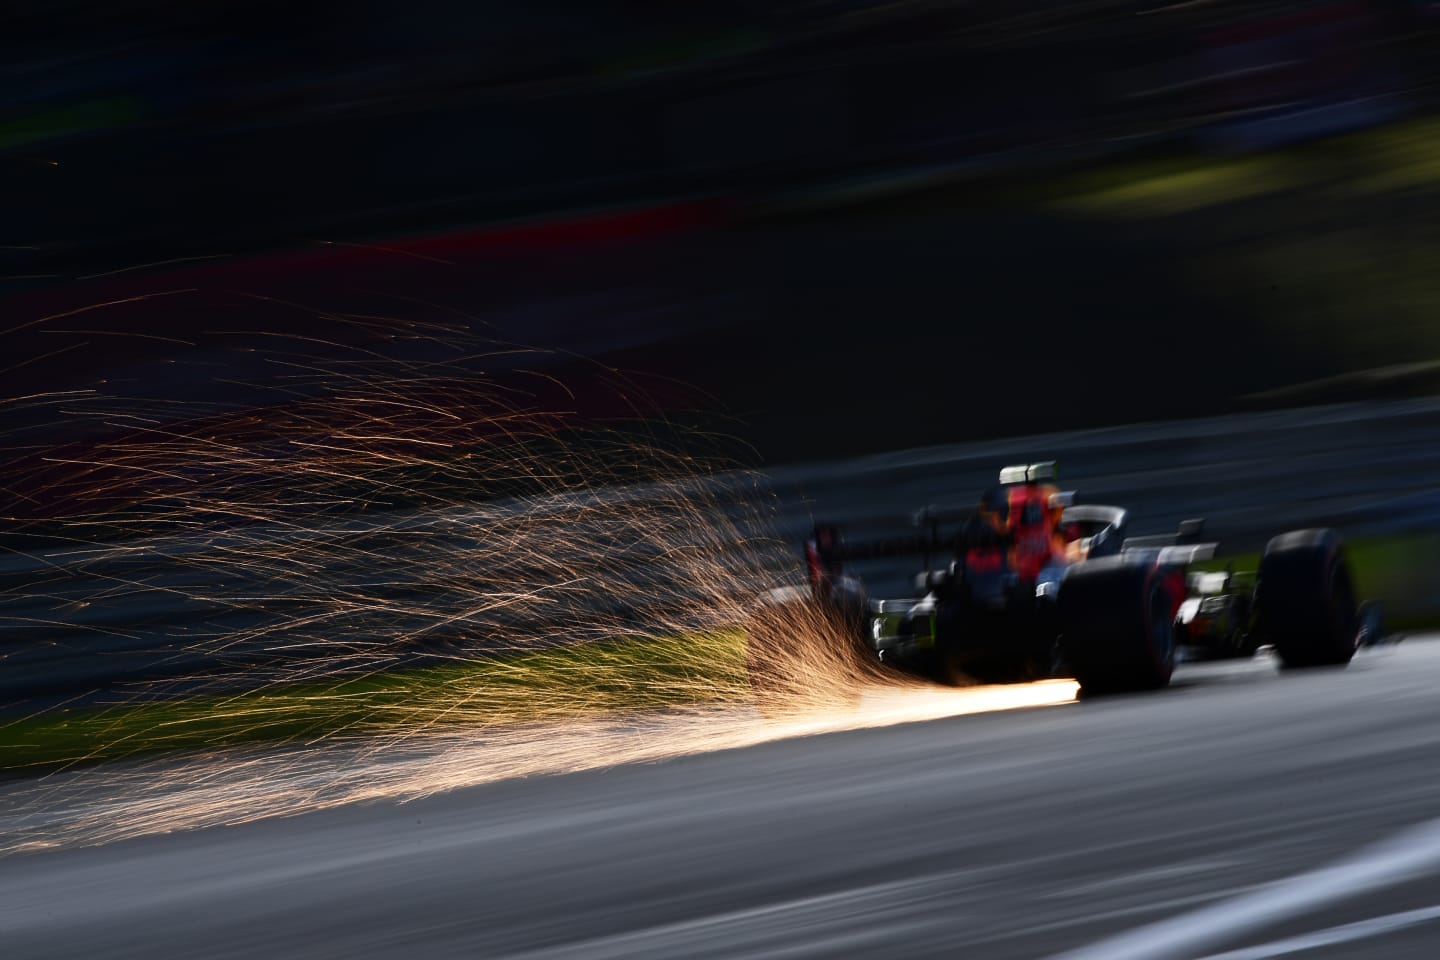 NUERBURG, GERMANY - OCTOBER 10: Sparks fly behind Max Verstappen of the Netherlands driving the (33) Aston Martin Red Bull Racing RB16 during qualifying ahead of the F1 Eifel Grand Prix at Nuerburgring on October 10, 2020 in Nuerburg, Germany. (Photo by Mario Renzi - Formula 1/Formula 1 via Getty Images)